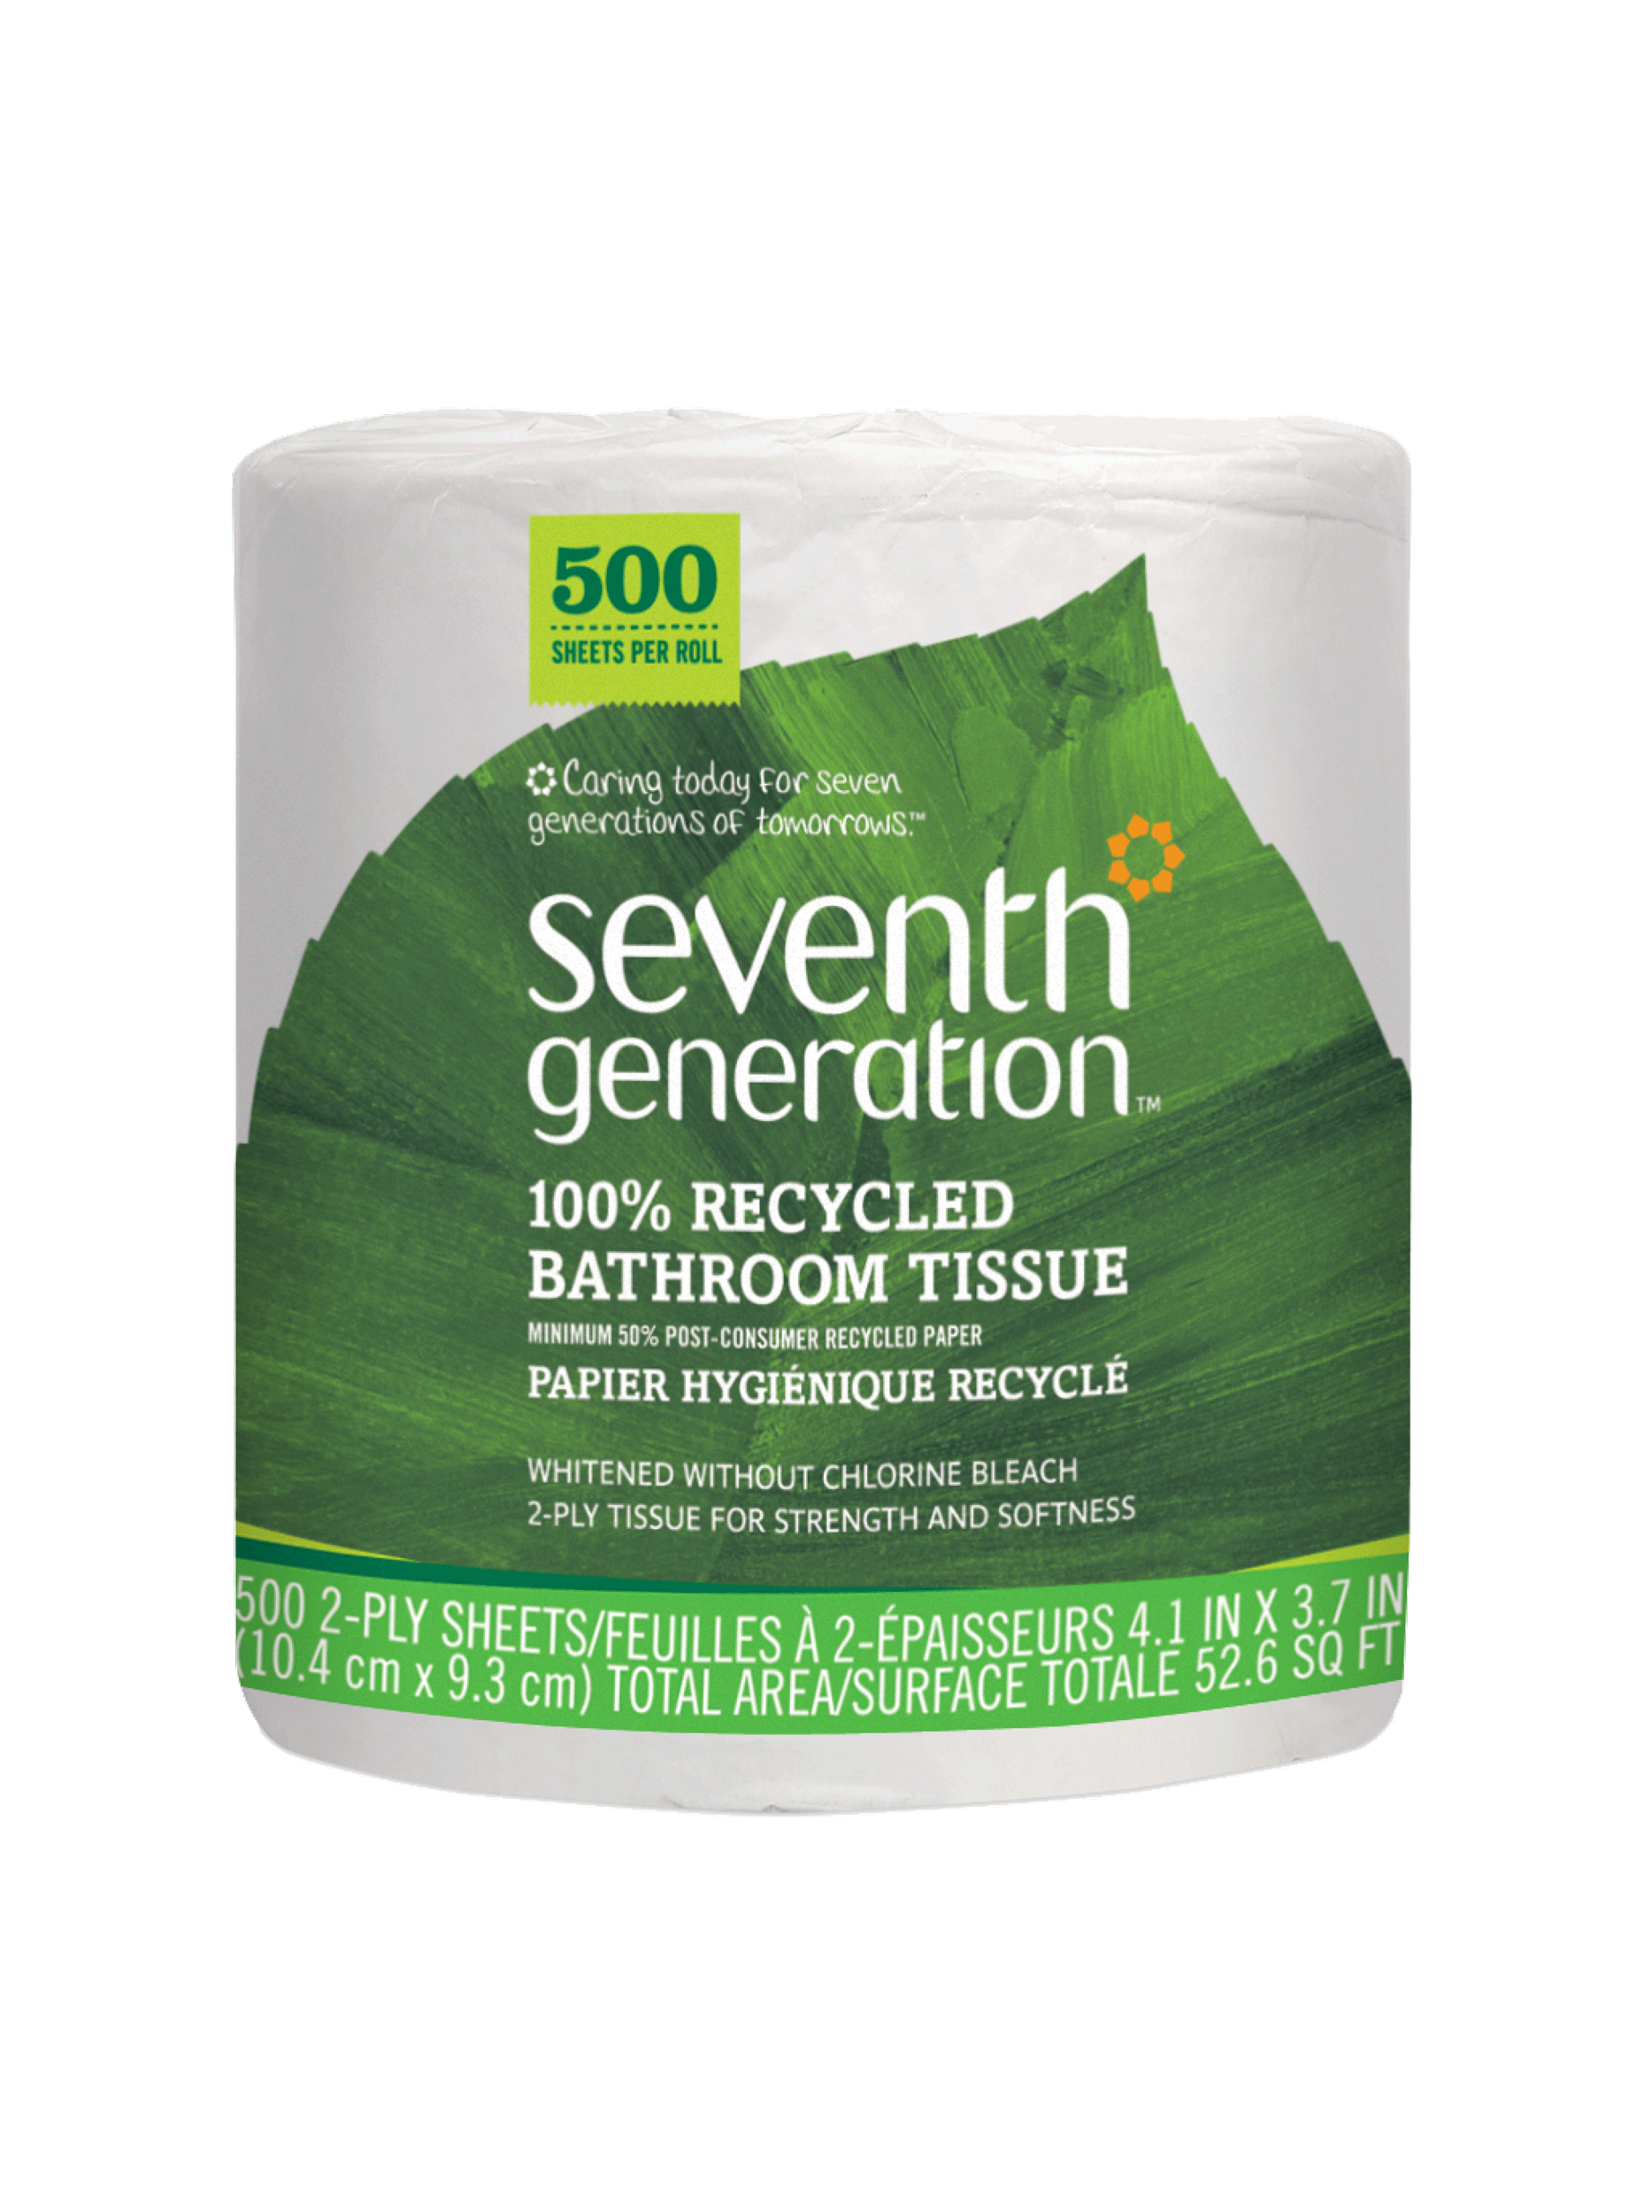 Basically, 4ct Large Roll Soft Toilet Paper